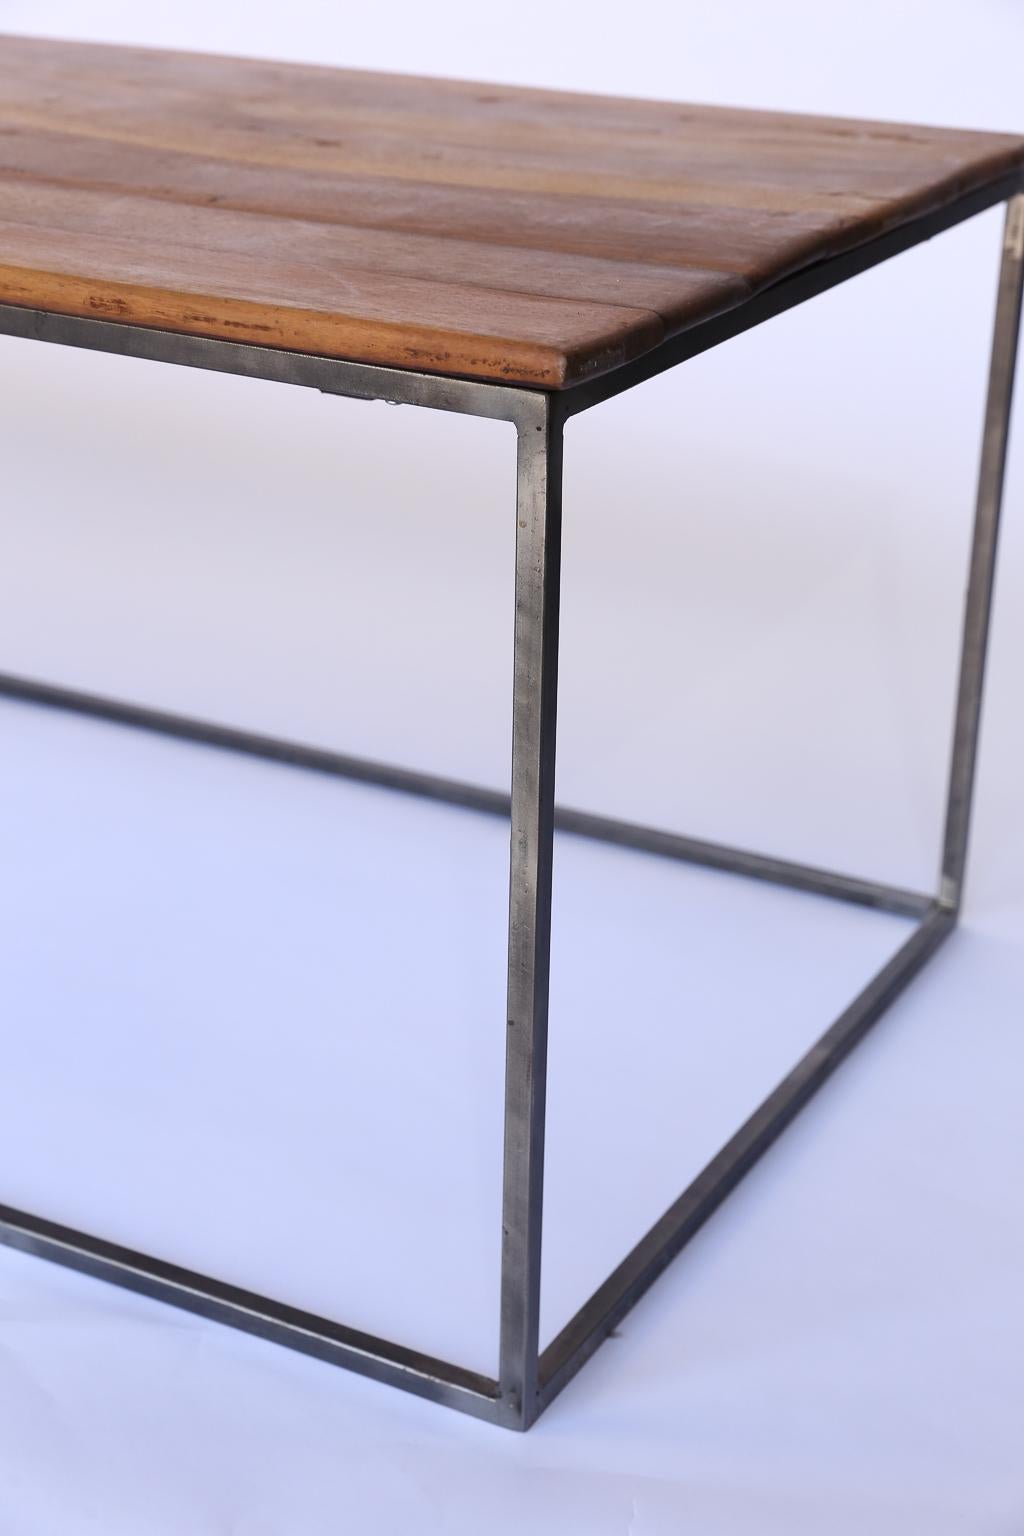 This sleek and modern custom made coffee table offers function and form. The classic combination of wood and iron will add warmth and texture to any setting and a great way to start or finish your living room decor. The reclaimed walnut has a lovely